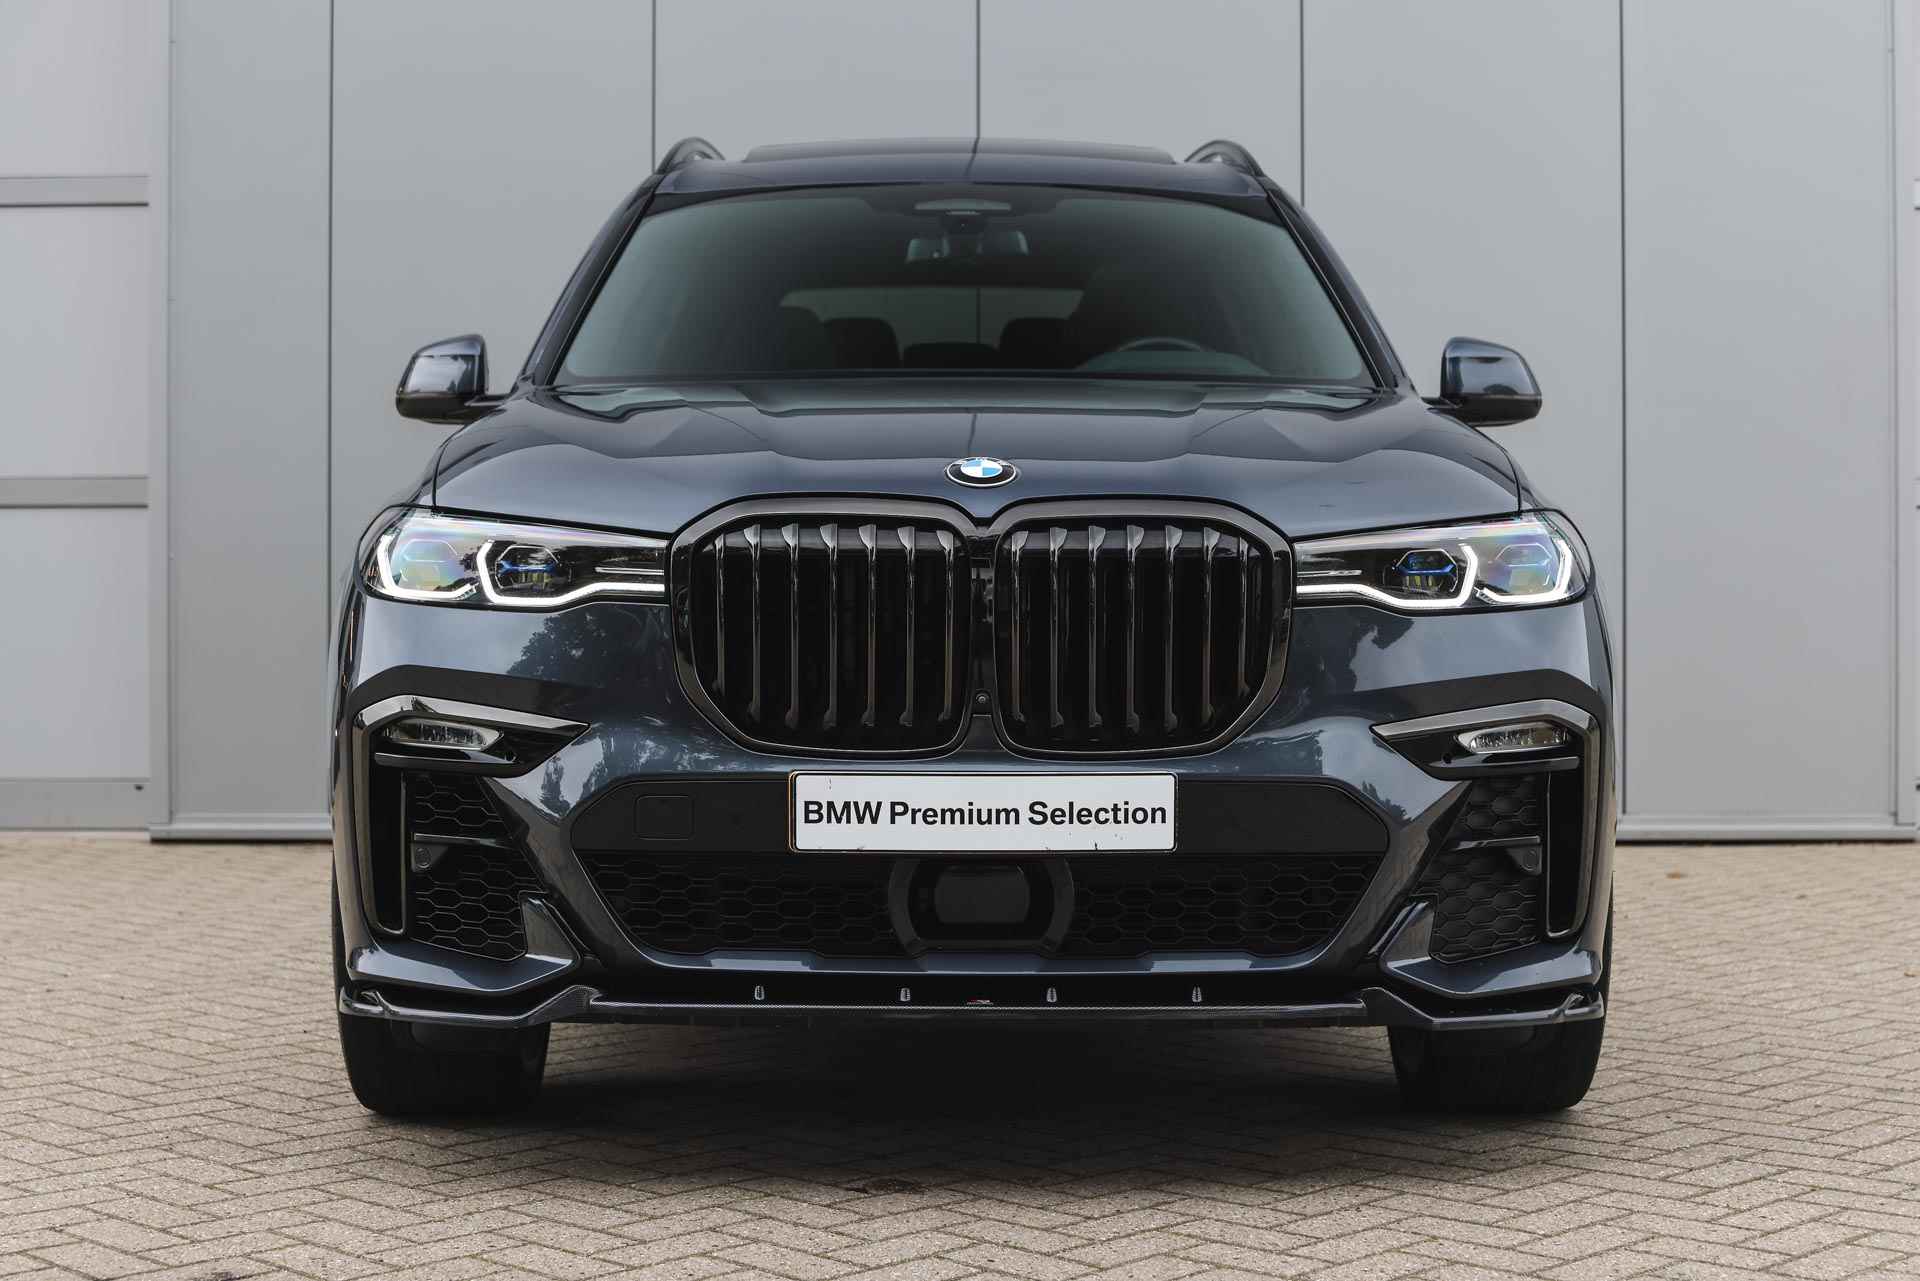 BMW X7 M50i High Executive Automaat / Active Steering / Stoelventilatie / Laserlight / Soft Close / Head-Up / Gesture Control / Parking Assistant Plus / Alpina wielen 23 inch - 7/56